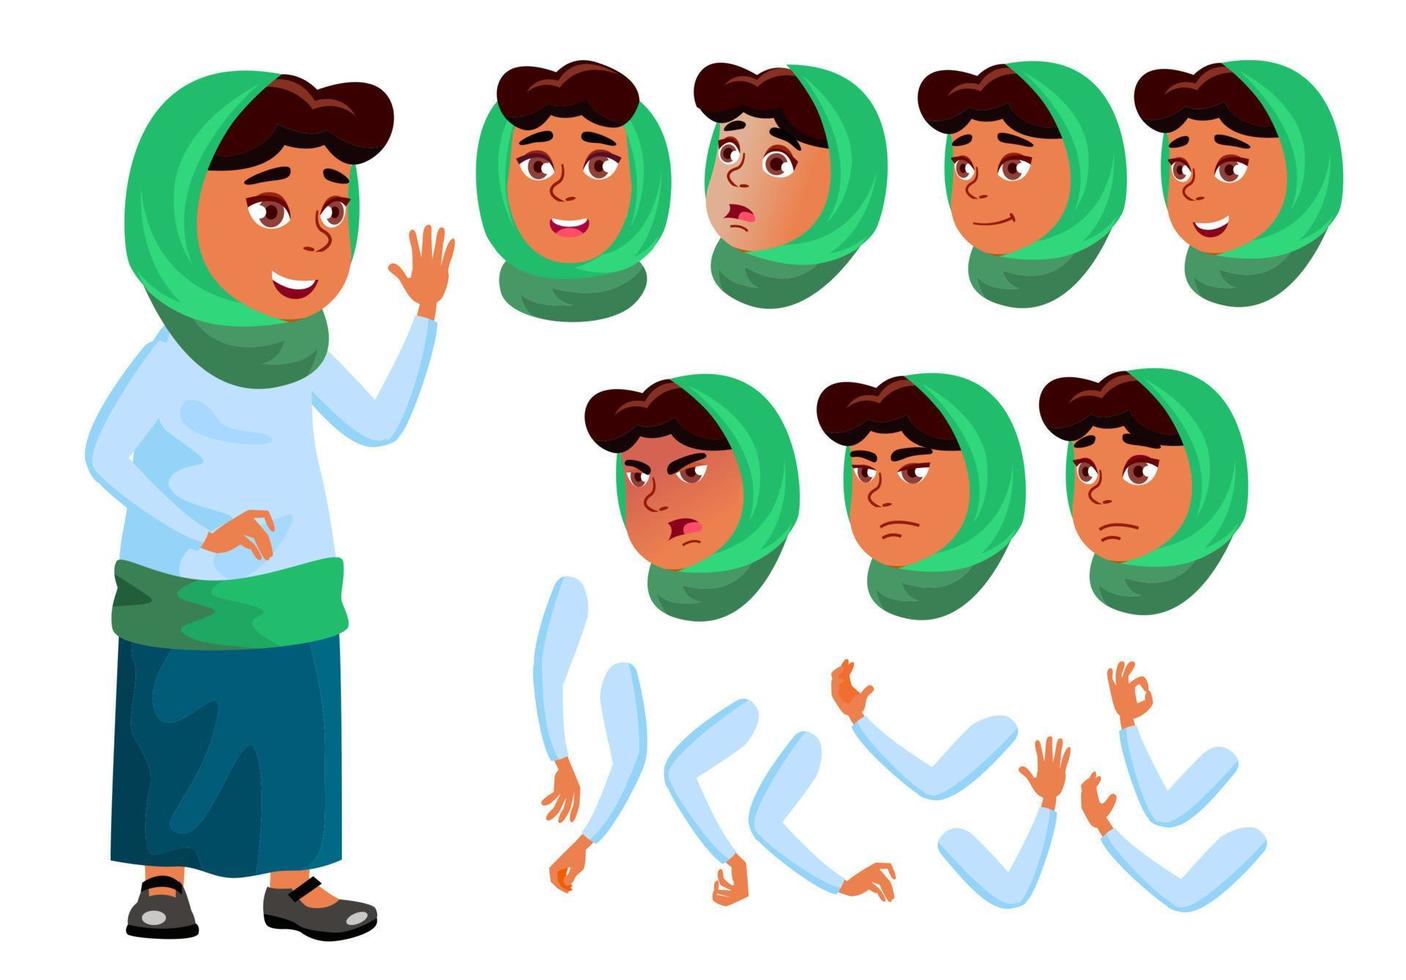 Arab, Muslim Teen Girl Vector. Teenager. Positive Person. Face. Children. Face Emotions, Various Gestures. Animation Creation Set. Isolated Flat Cartoon Character Illustration vector